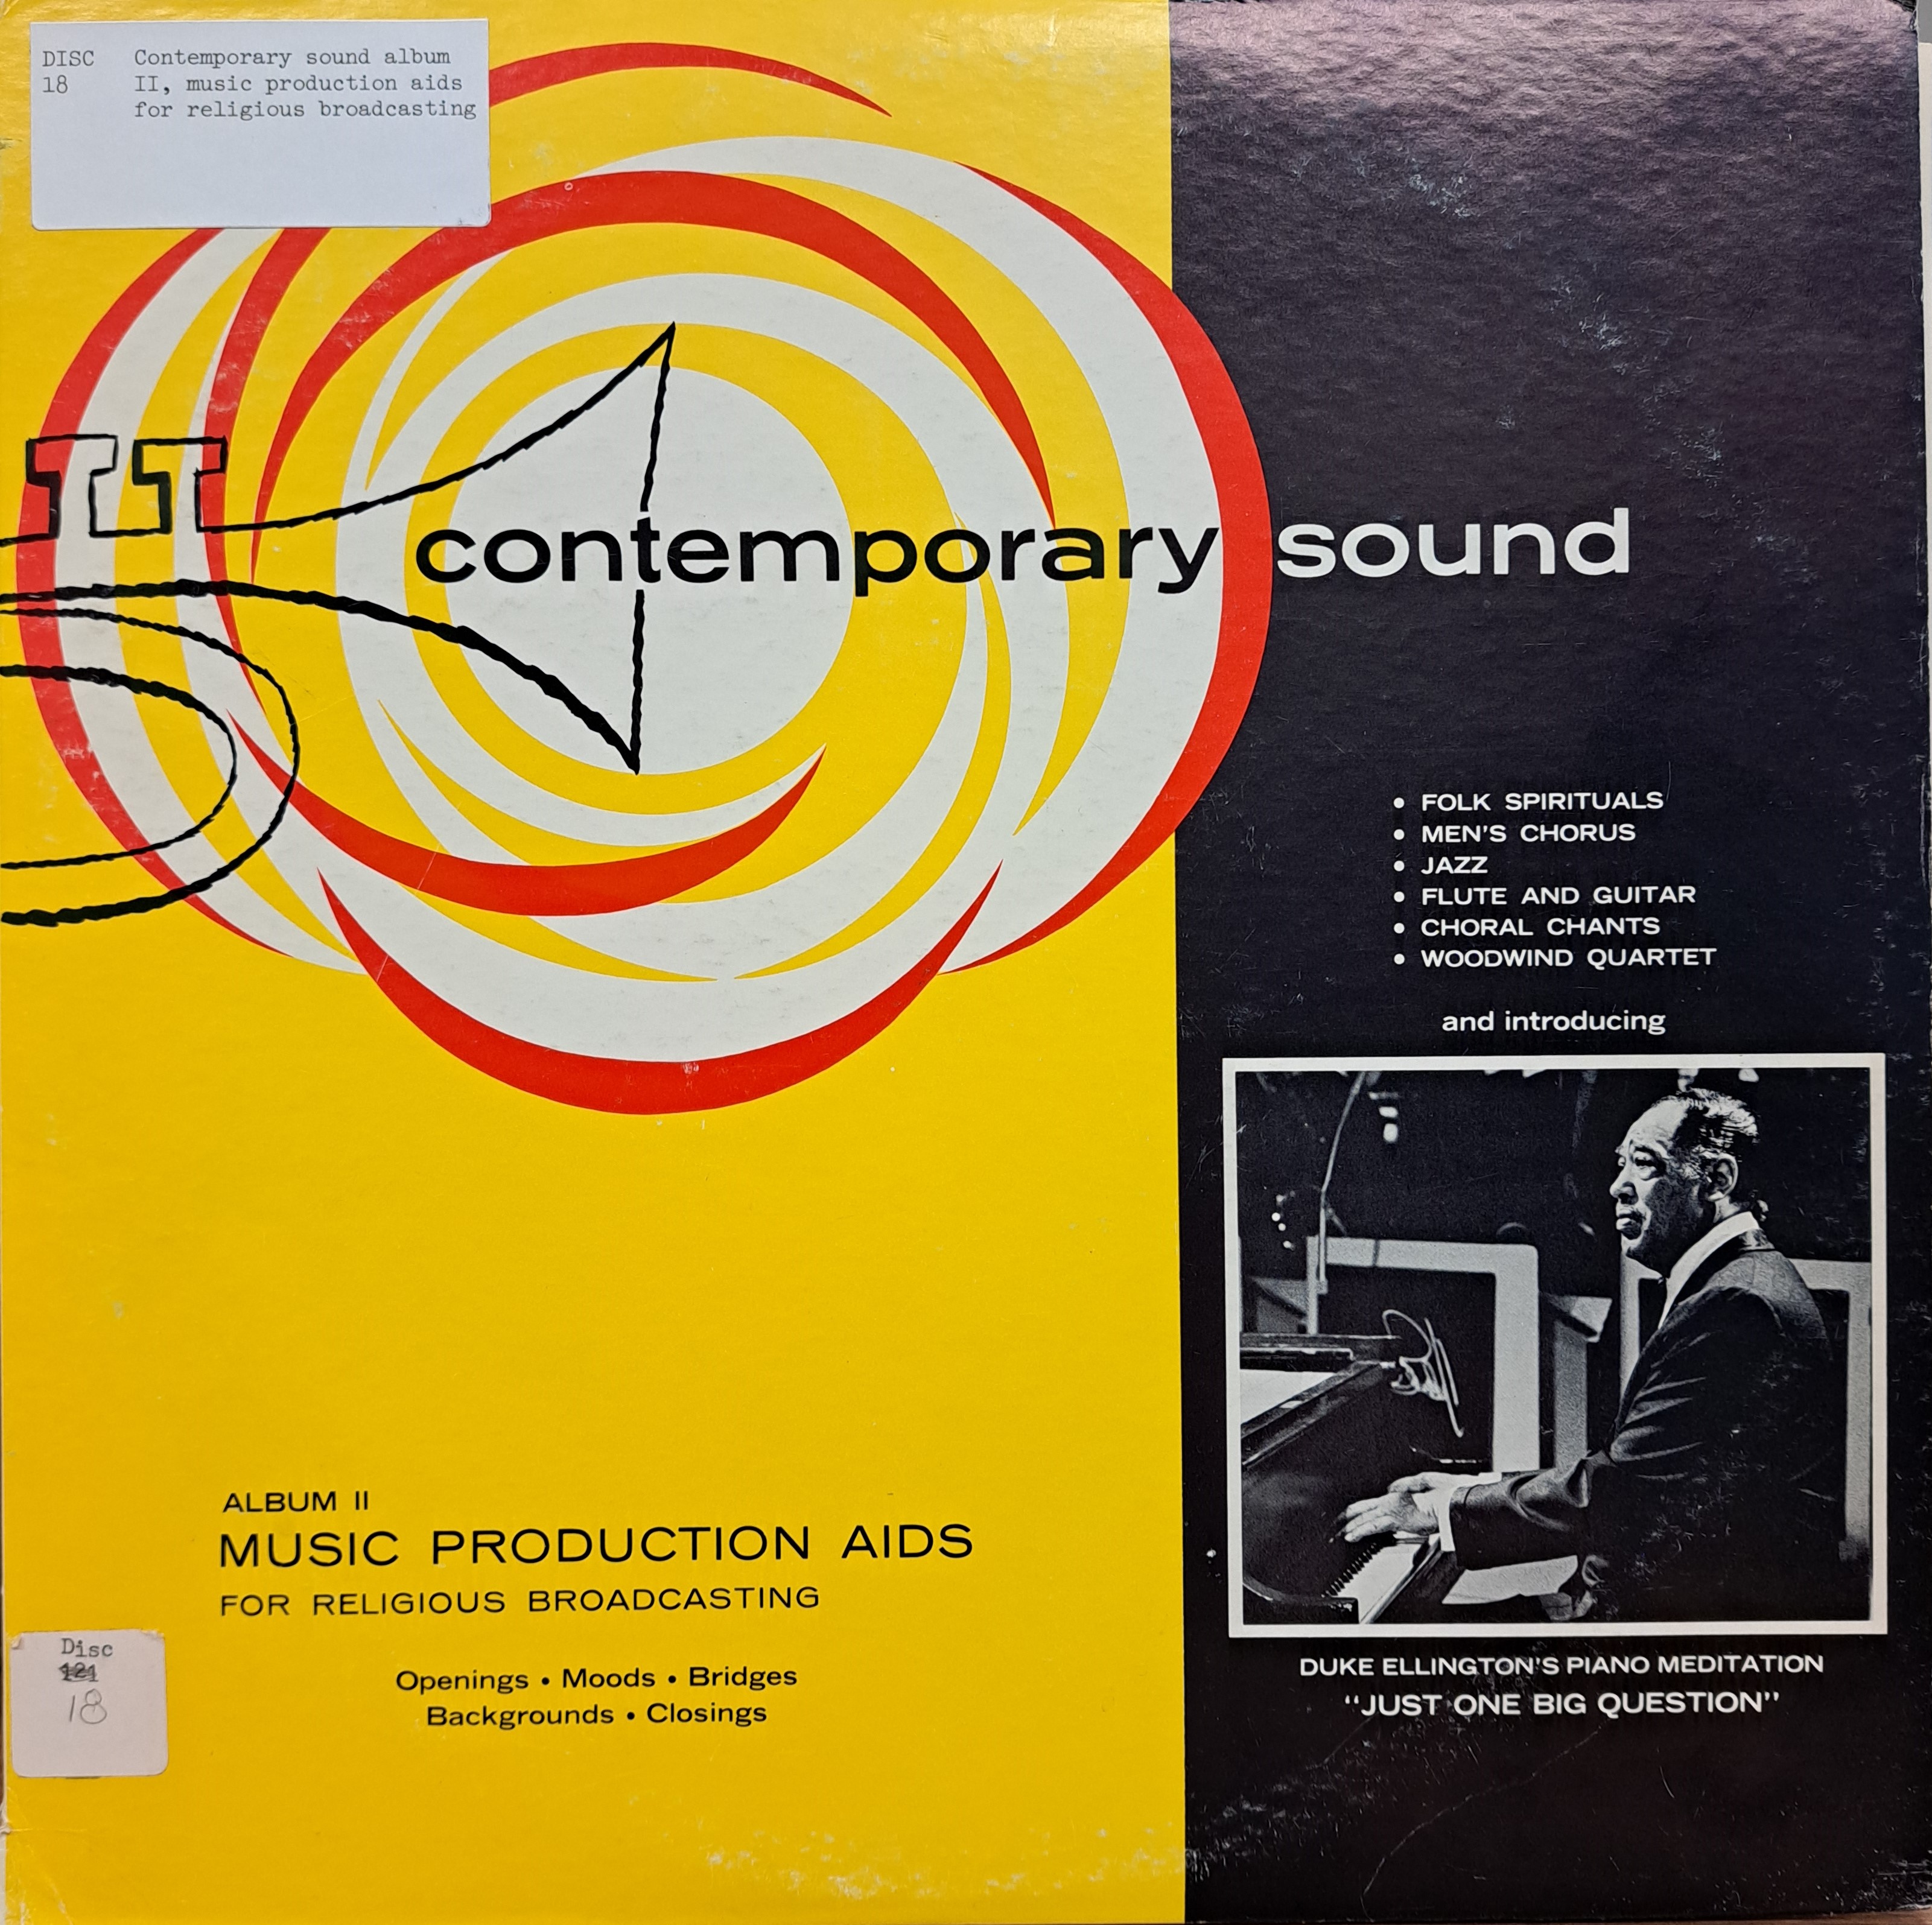 Contemporary sound: album II, music production aids for religious broadcasting, before 1968, side 1